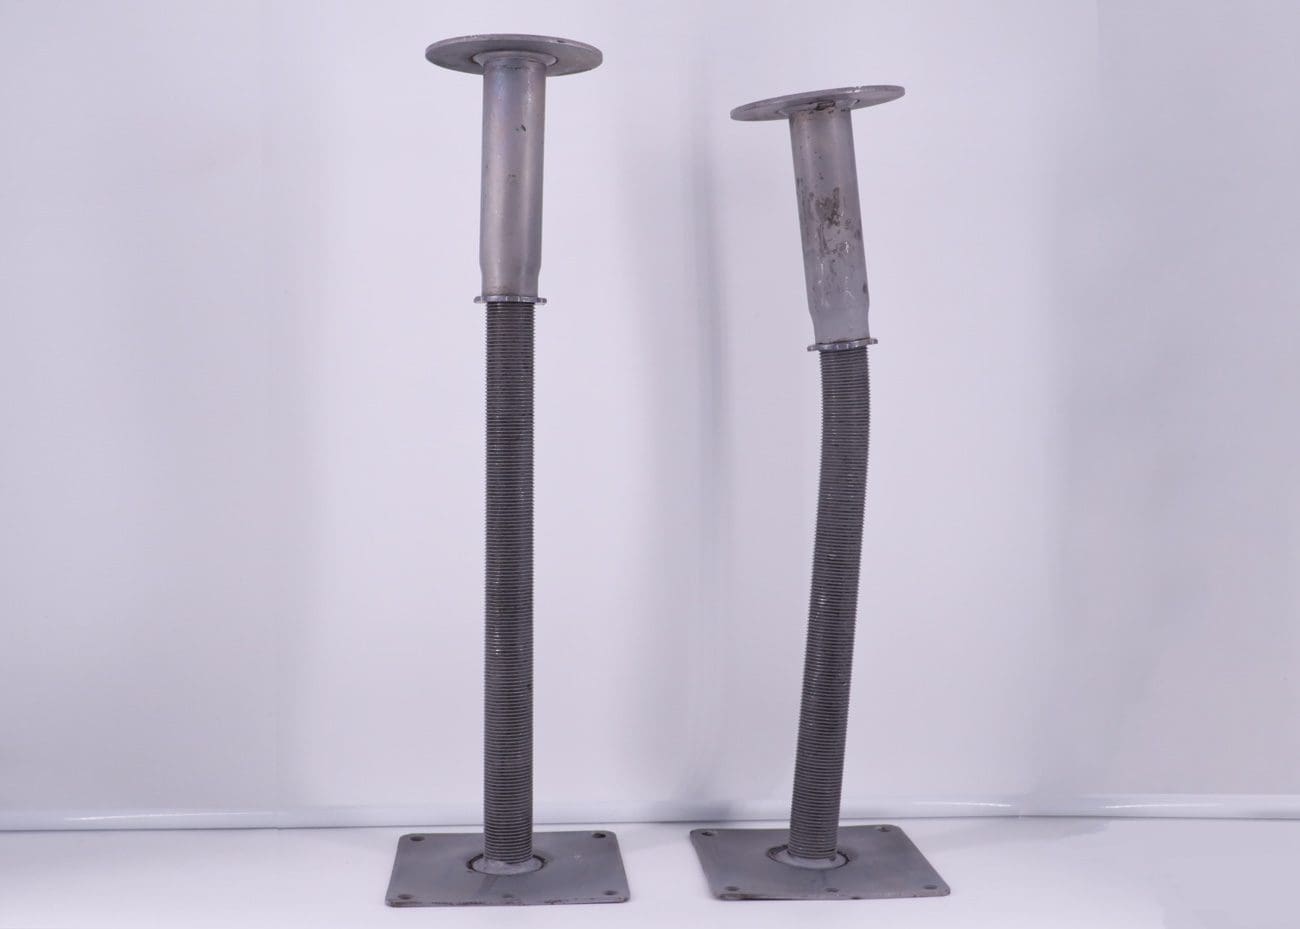 The RP-FR-8 pedestal before and after 3.8 tonnes of weight.